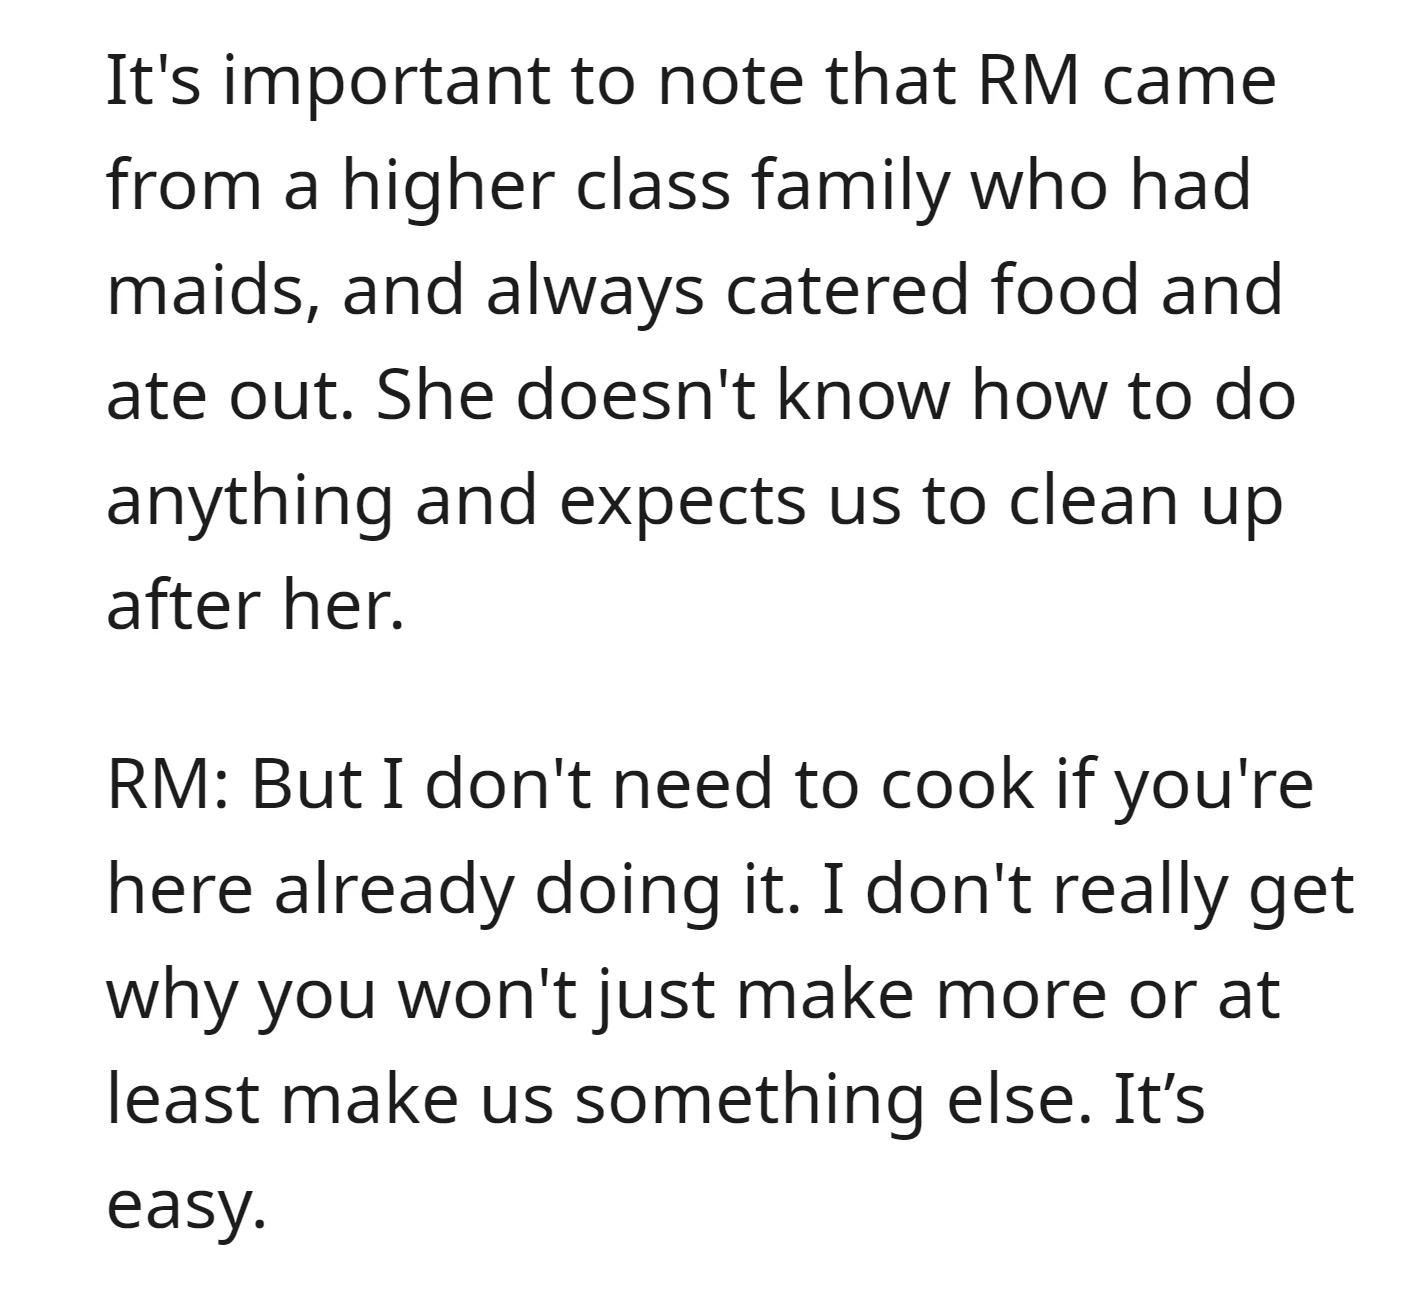 The roommate comes from a higher-class family with maids and catered meals, so lacks basic cooking skills